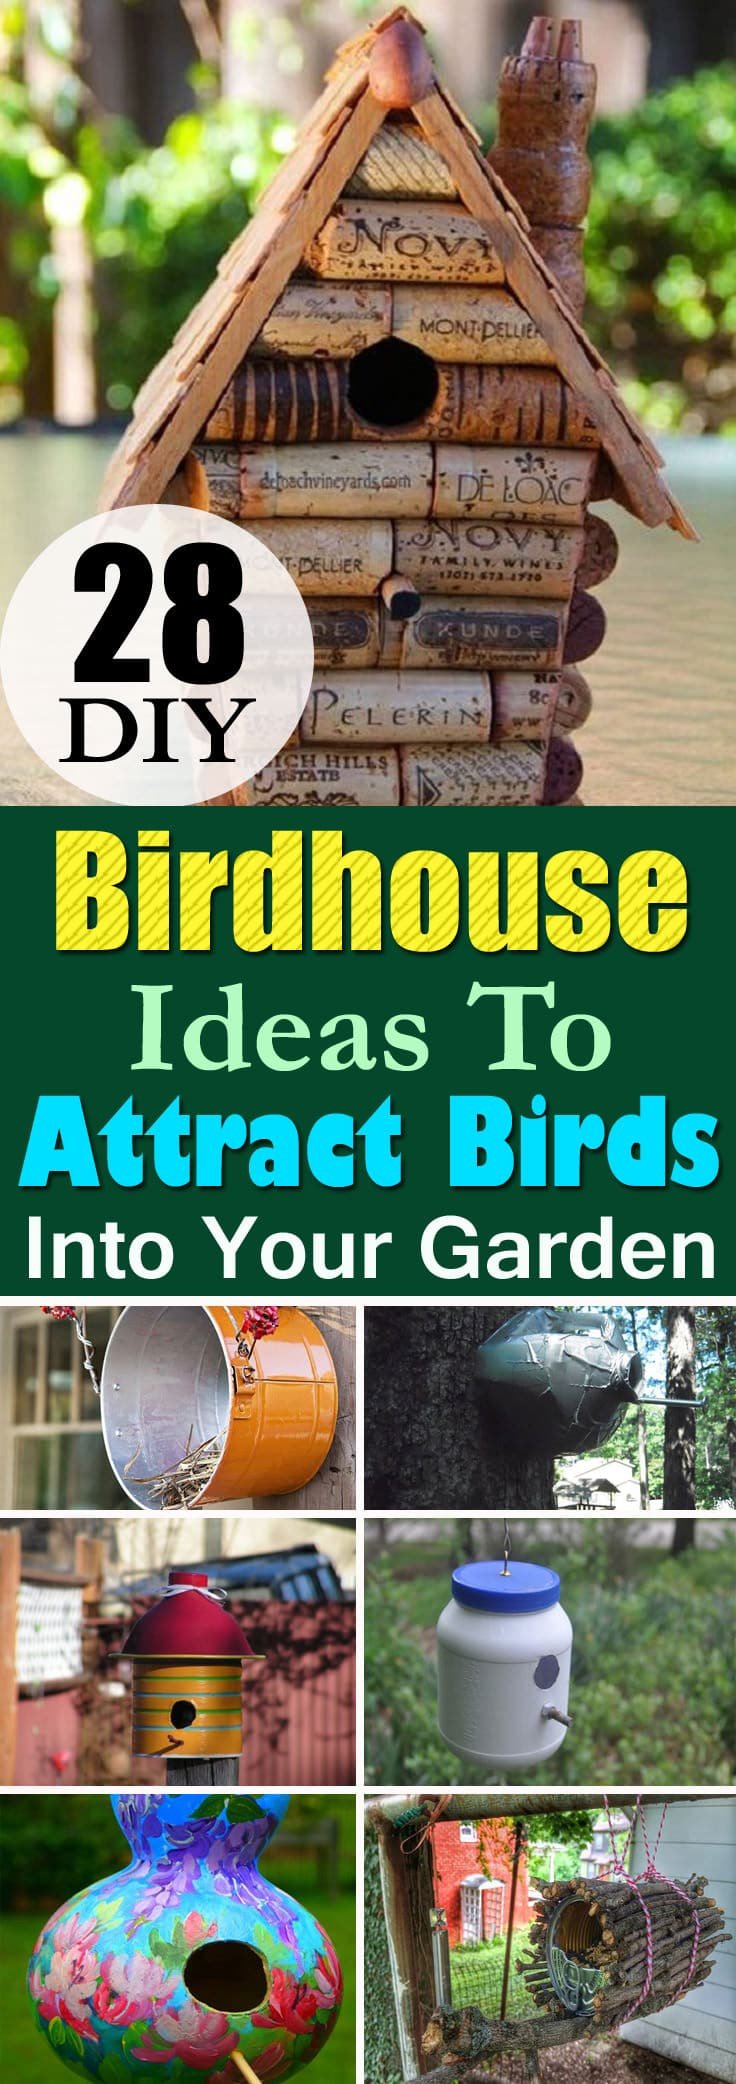 Attract birds in your garden or apartment balcony by providing them shelter. Here're the 28 Best DIY Birdhouse Ideas with tutorials!